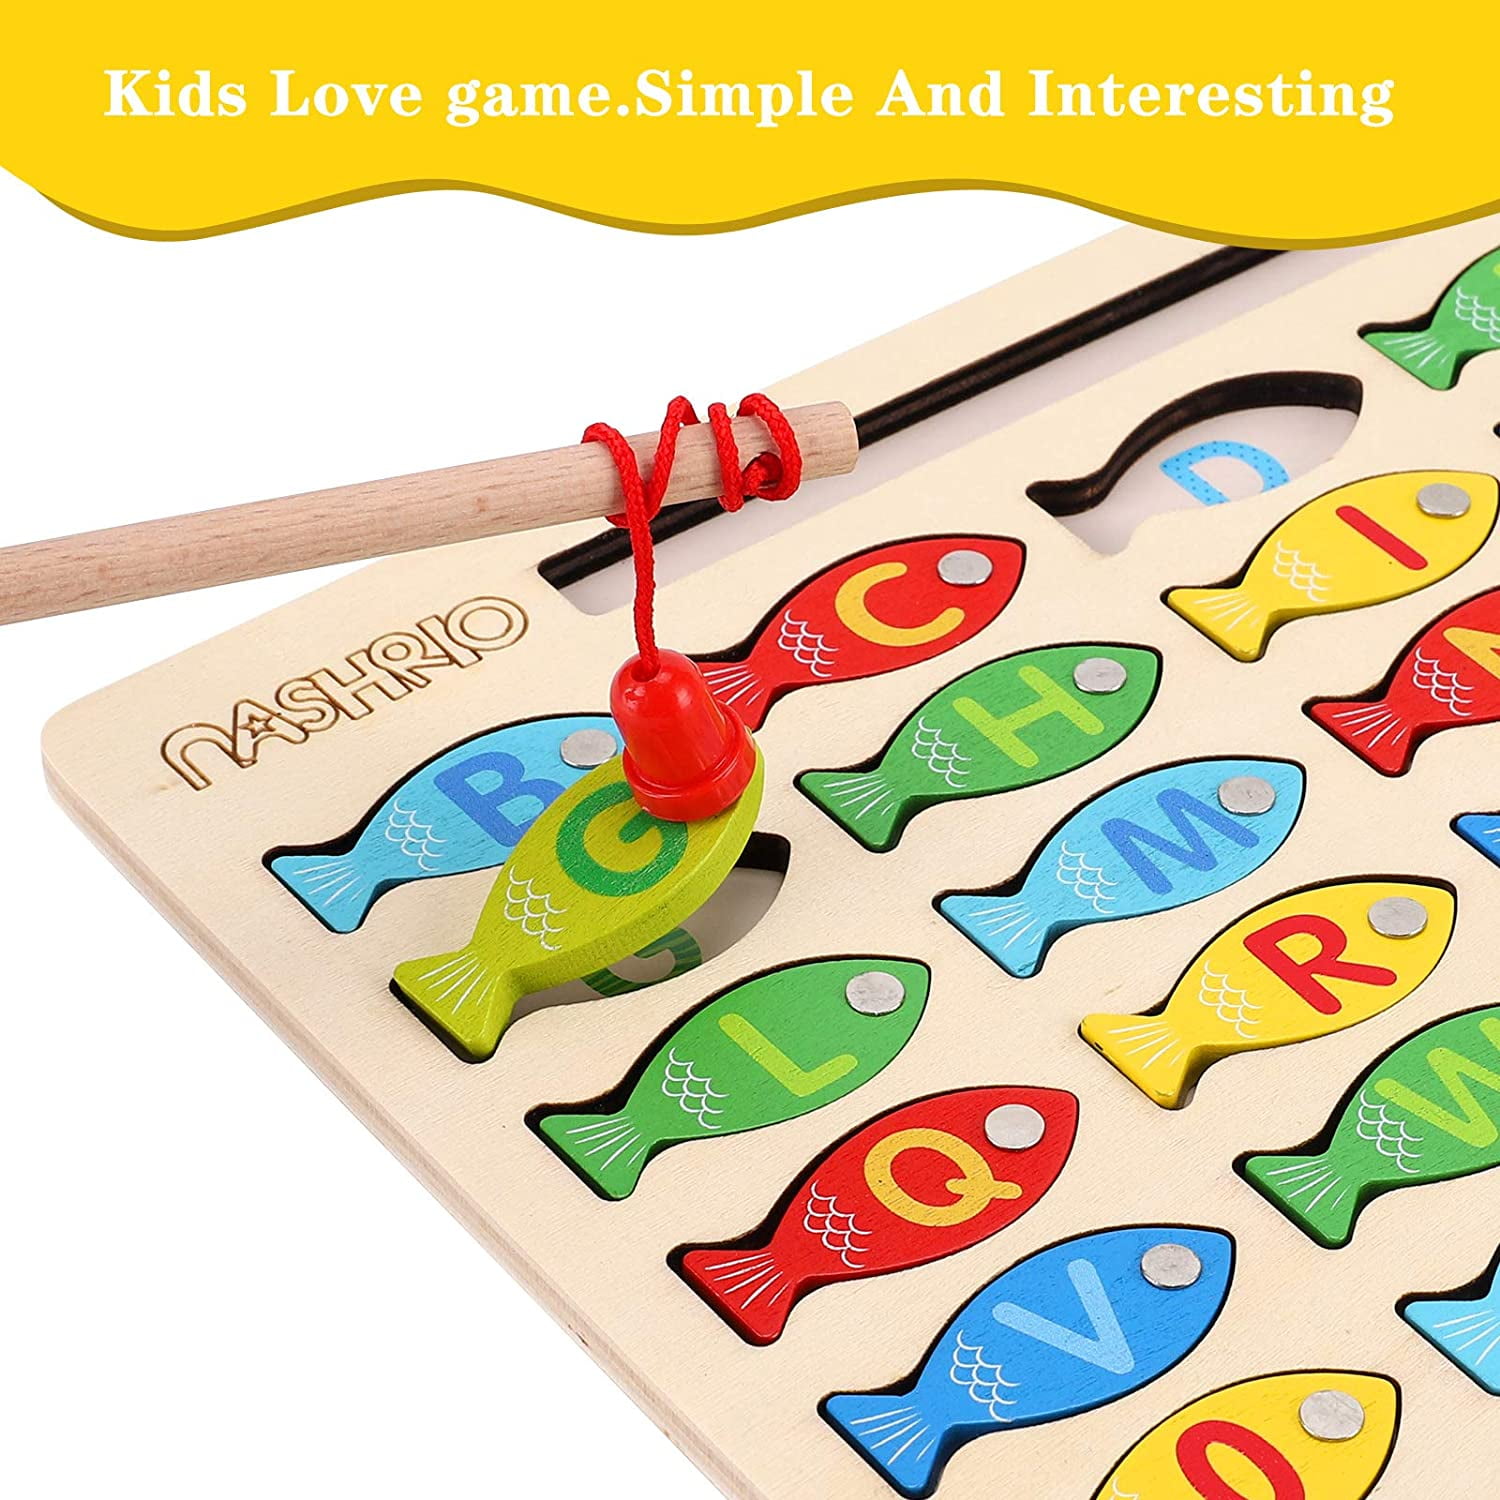  Slotic Magnetic Wooden Fishing Game Toy for Toddlers - Alphabet  ABC Fish Catching Counting Learning Education Math Preschool Board Games  Toys Gifts for 3 4 5 Years Old Girl Boy Kids 